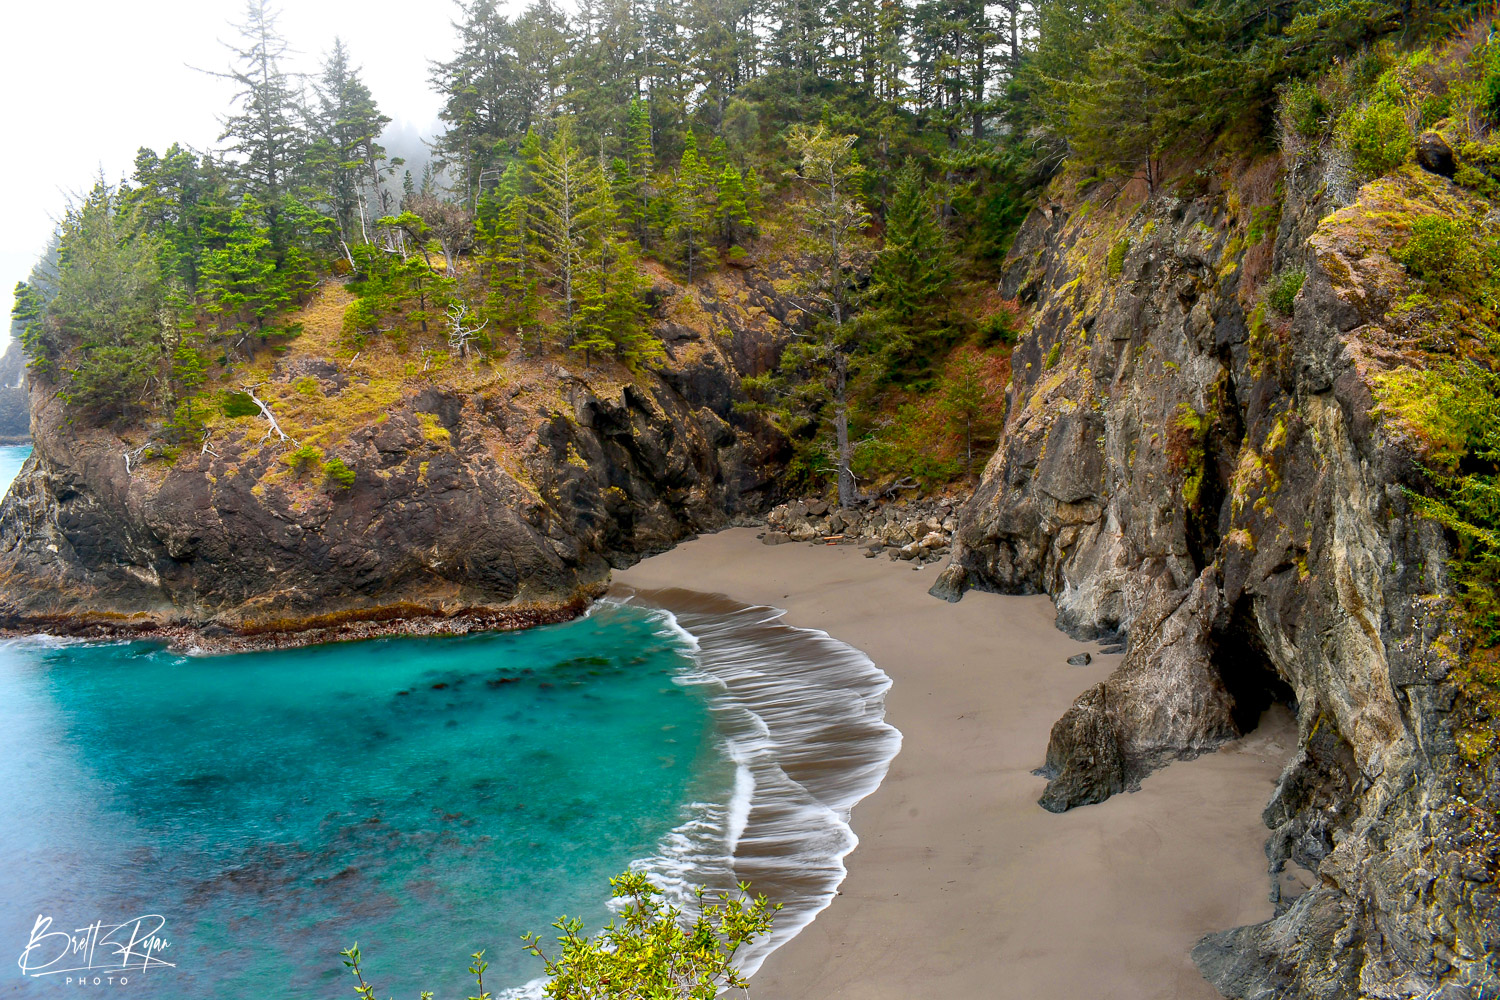 Image captured near Secret Beach in Oregon. Limited Edition Print of 100.